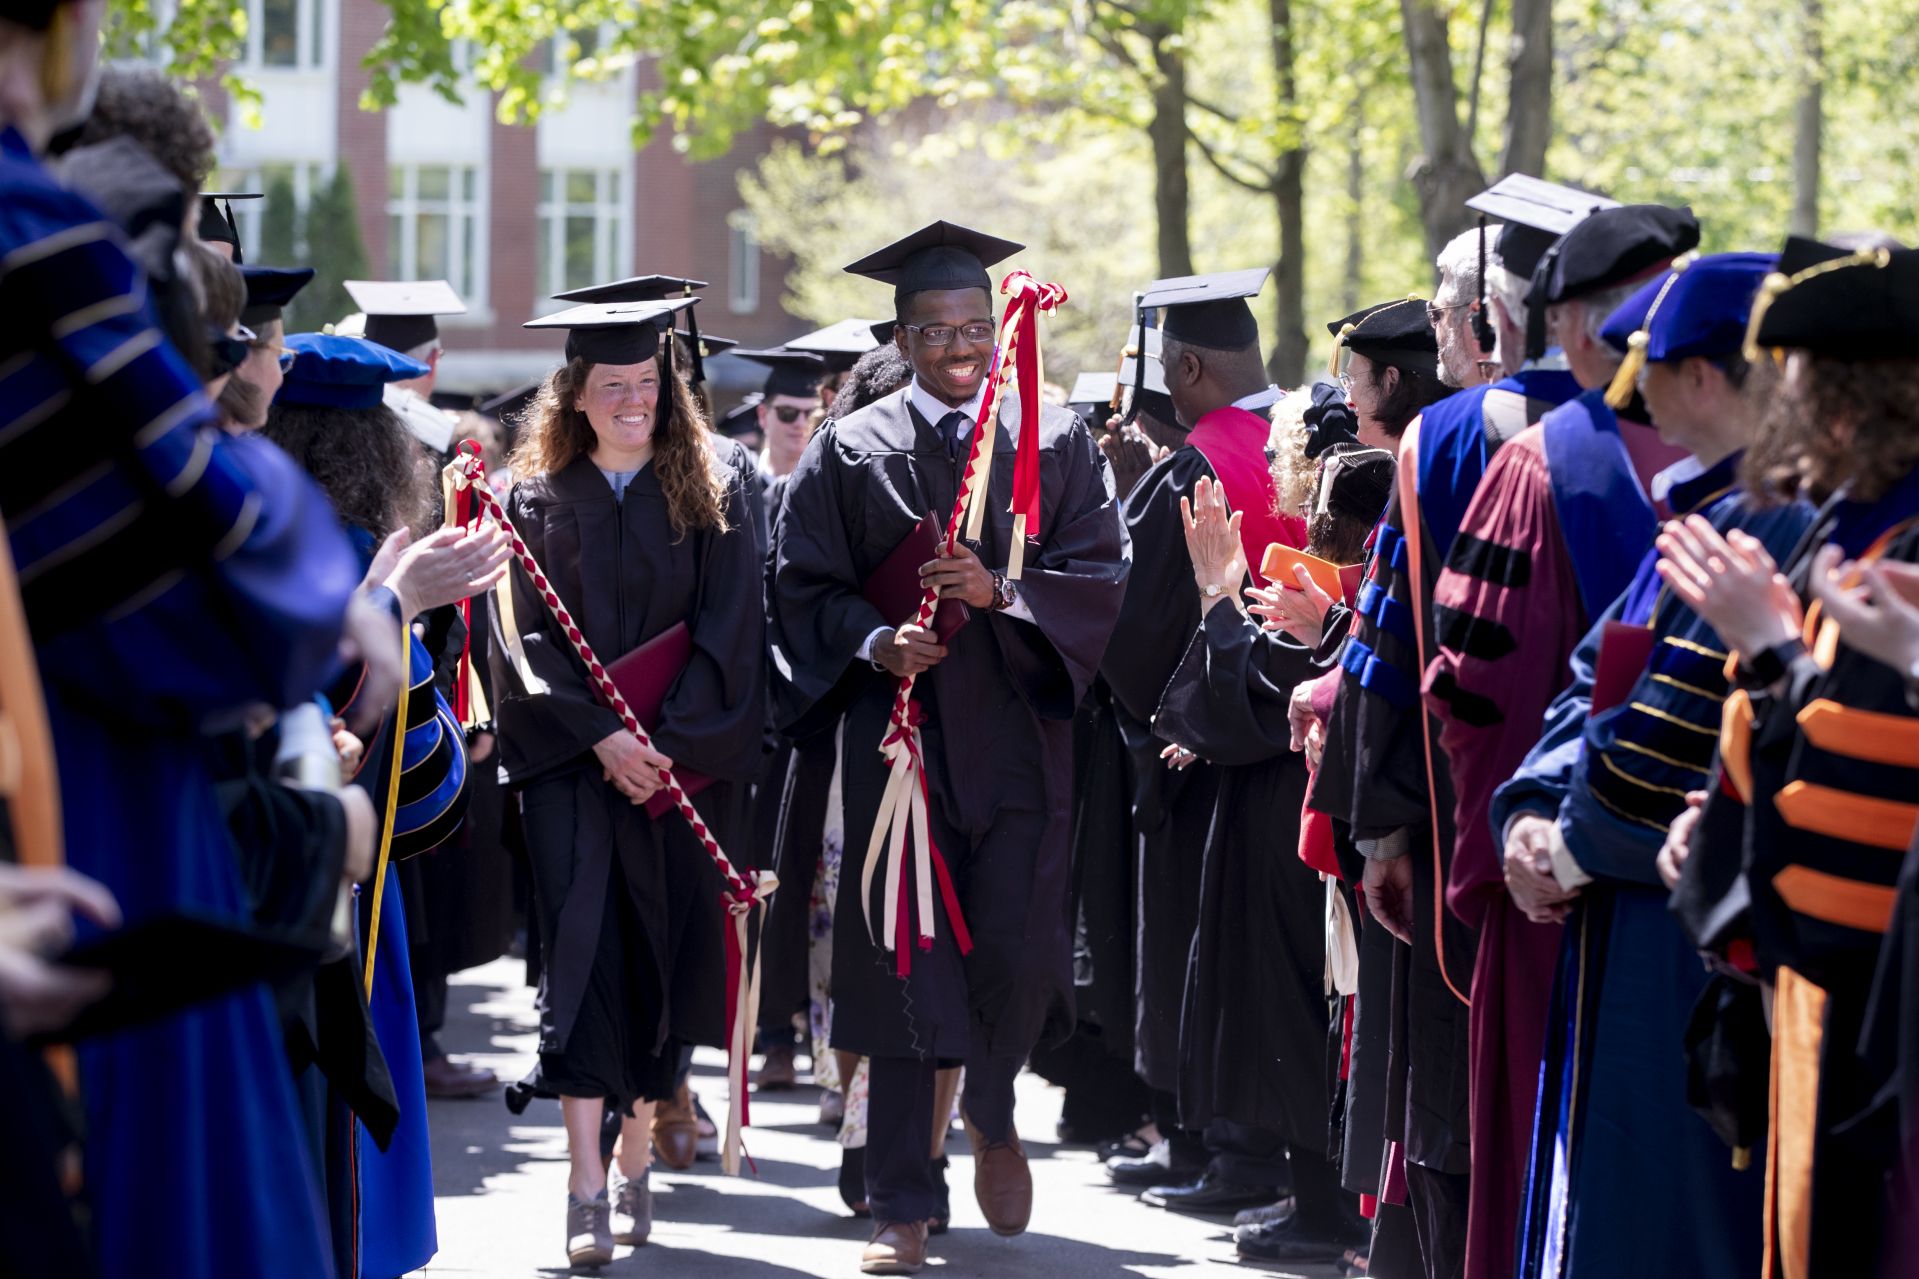 Bates College 2019 Commencement (the one hundred and fifty-third) on the Historic Quad, at which Travis Mills receives an Doctor of Humane Letter. Placing the collar on Mills is the college's mace bearer, Charles Franklin Phillips Professor of EconomicsMichael Murray.Senior class marshals Katherine Gallard and Michael Driscal Jr. lead the student recessional as they pass through two lines of faculty.